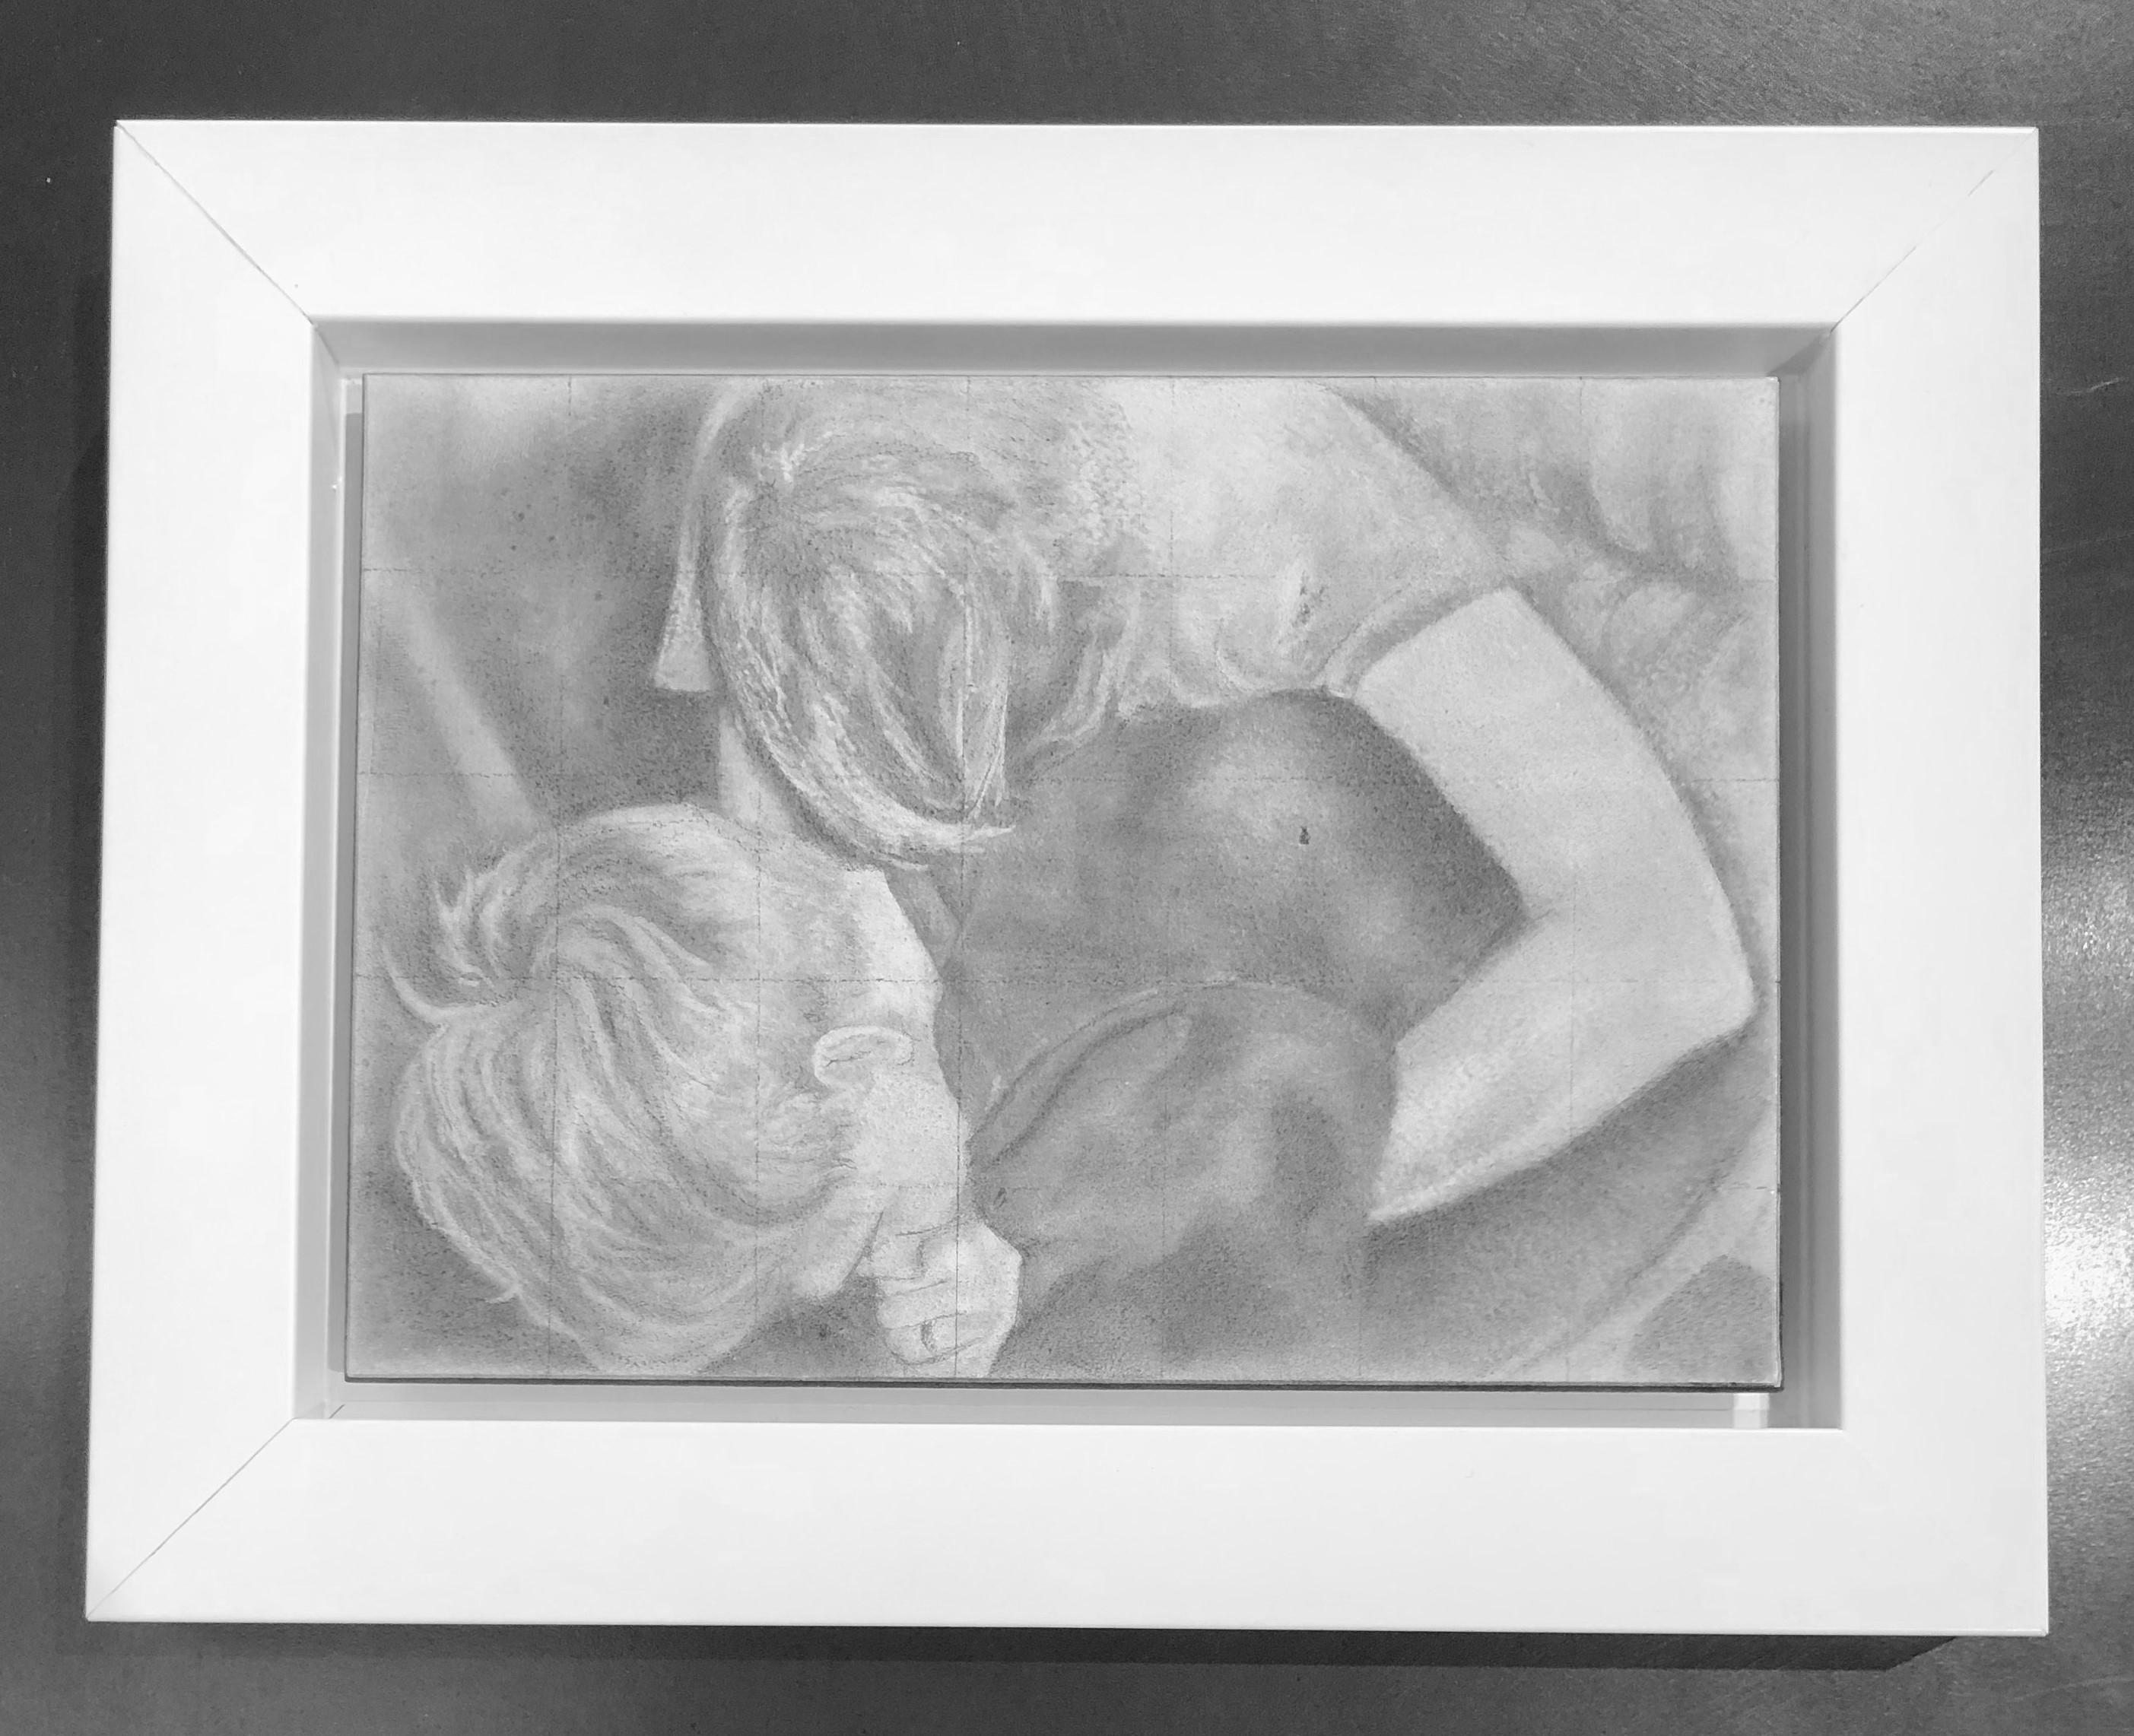 Untitled #5 - Two Entwined Figures, Original Graphite Drawing on Panel - Art by Rick Sindt